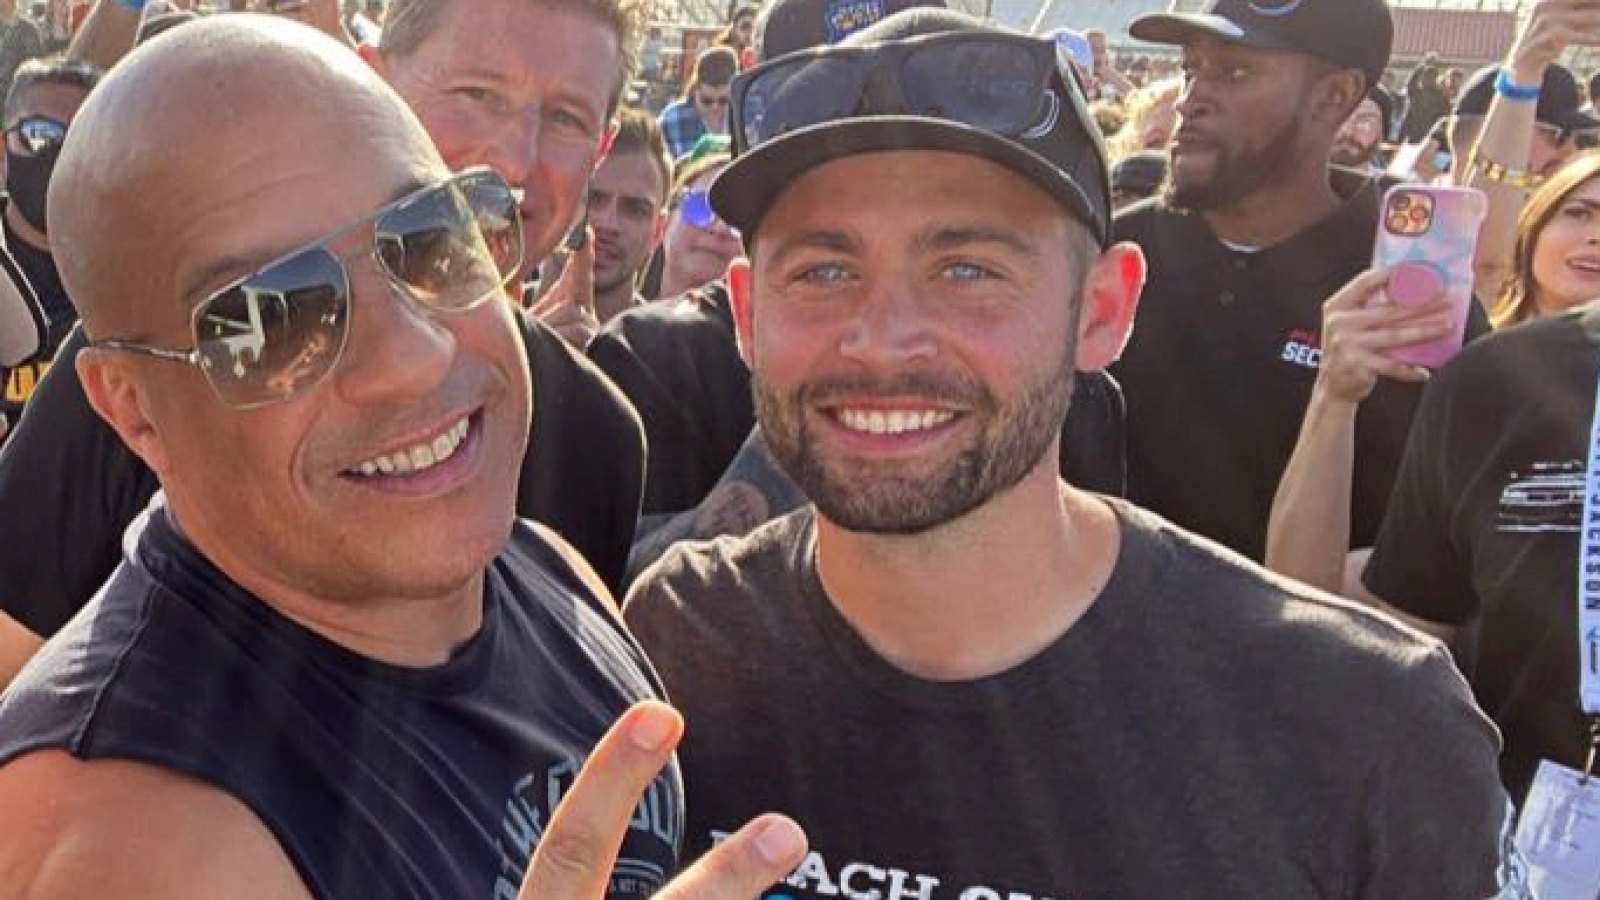 Cody Walker and Vin Diesel reunite to remember late actor Paul Walker on the latter’s 8th death anniversary.